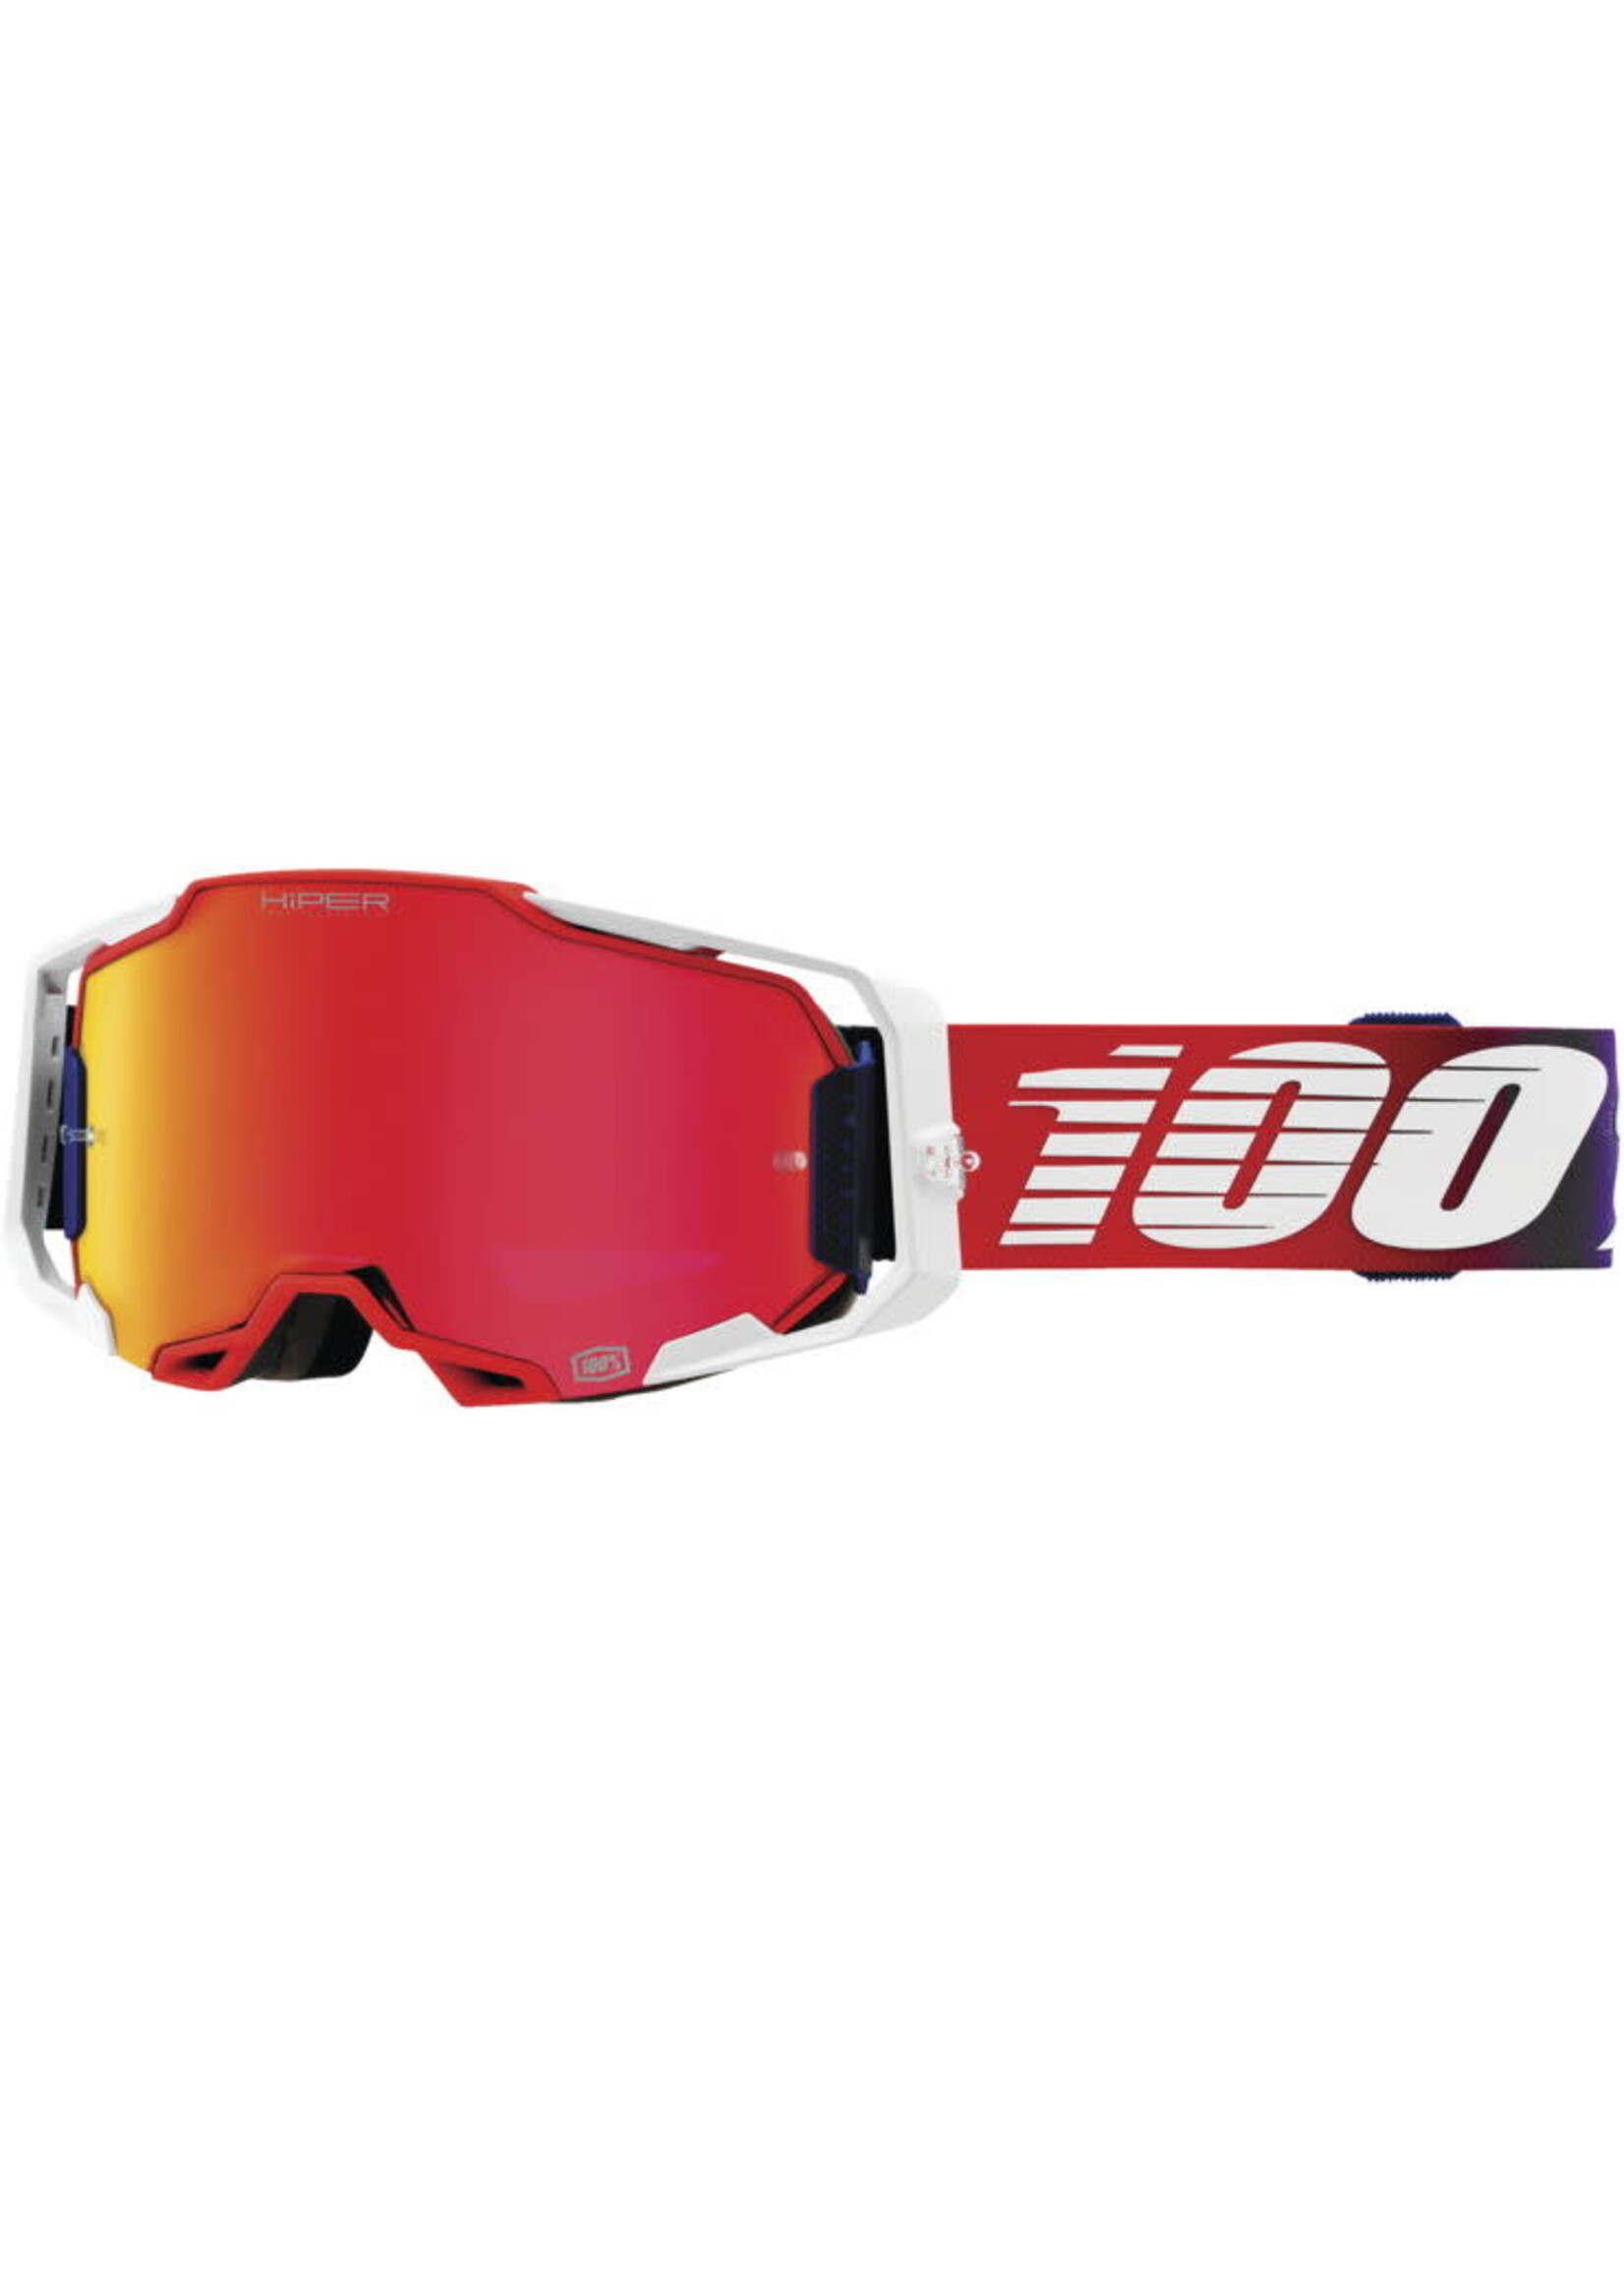 100% 100% ARMEGA GOGGLE FACTORY WITH HIPER RED LENS